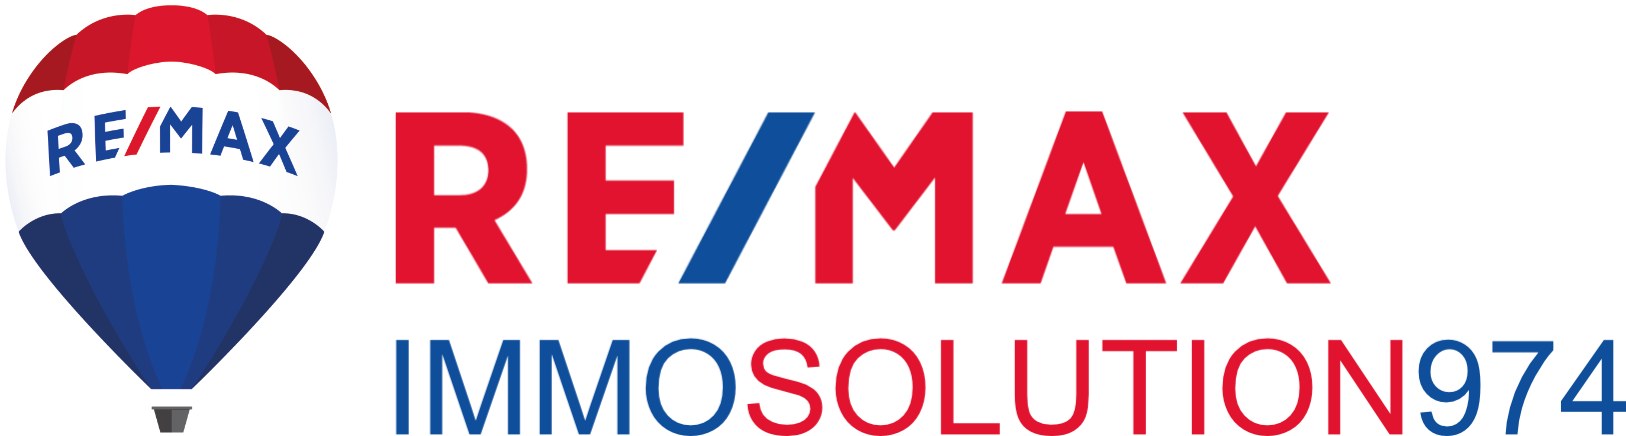 Agence immobilières RE/MAX IMMOSOLUTION974